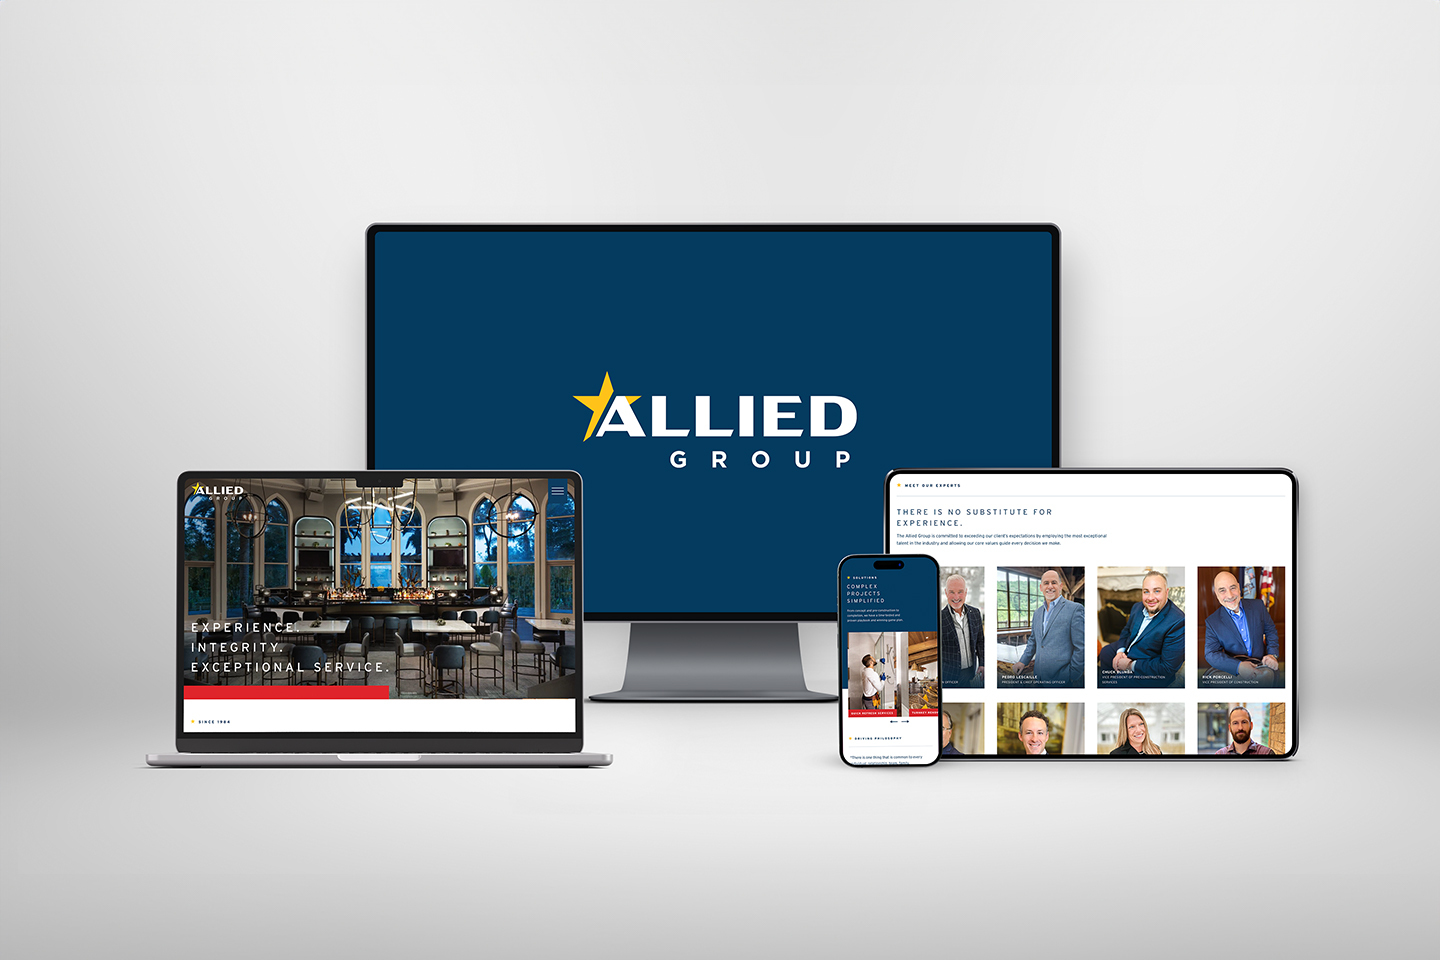 Allied Group Device Mockup showcasing new website and logo design by Splendor